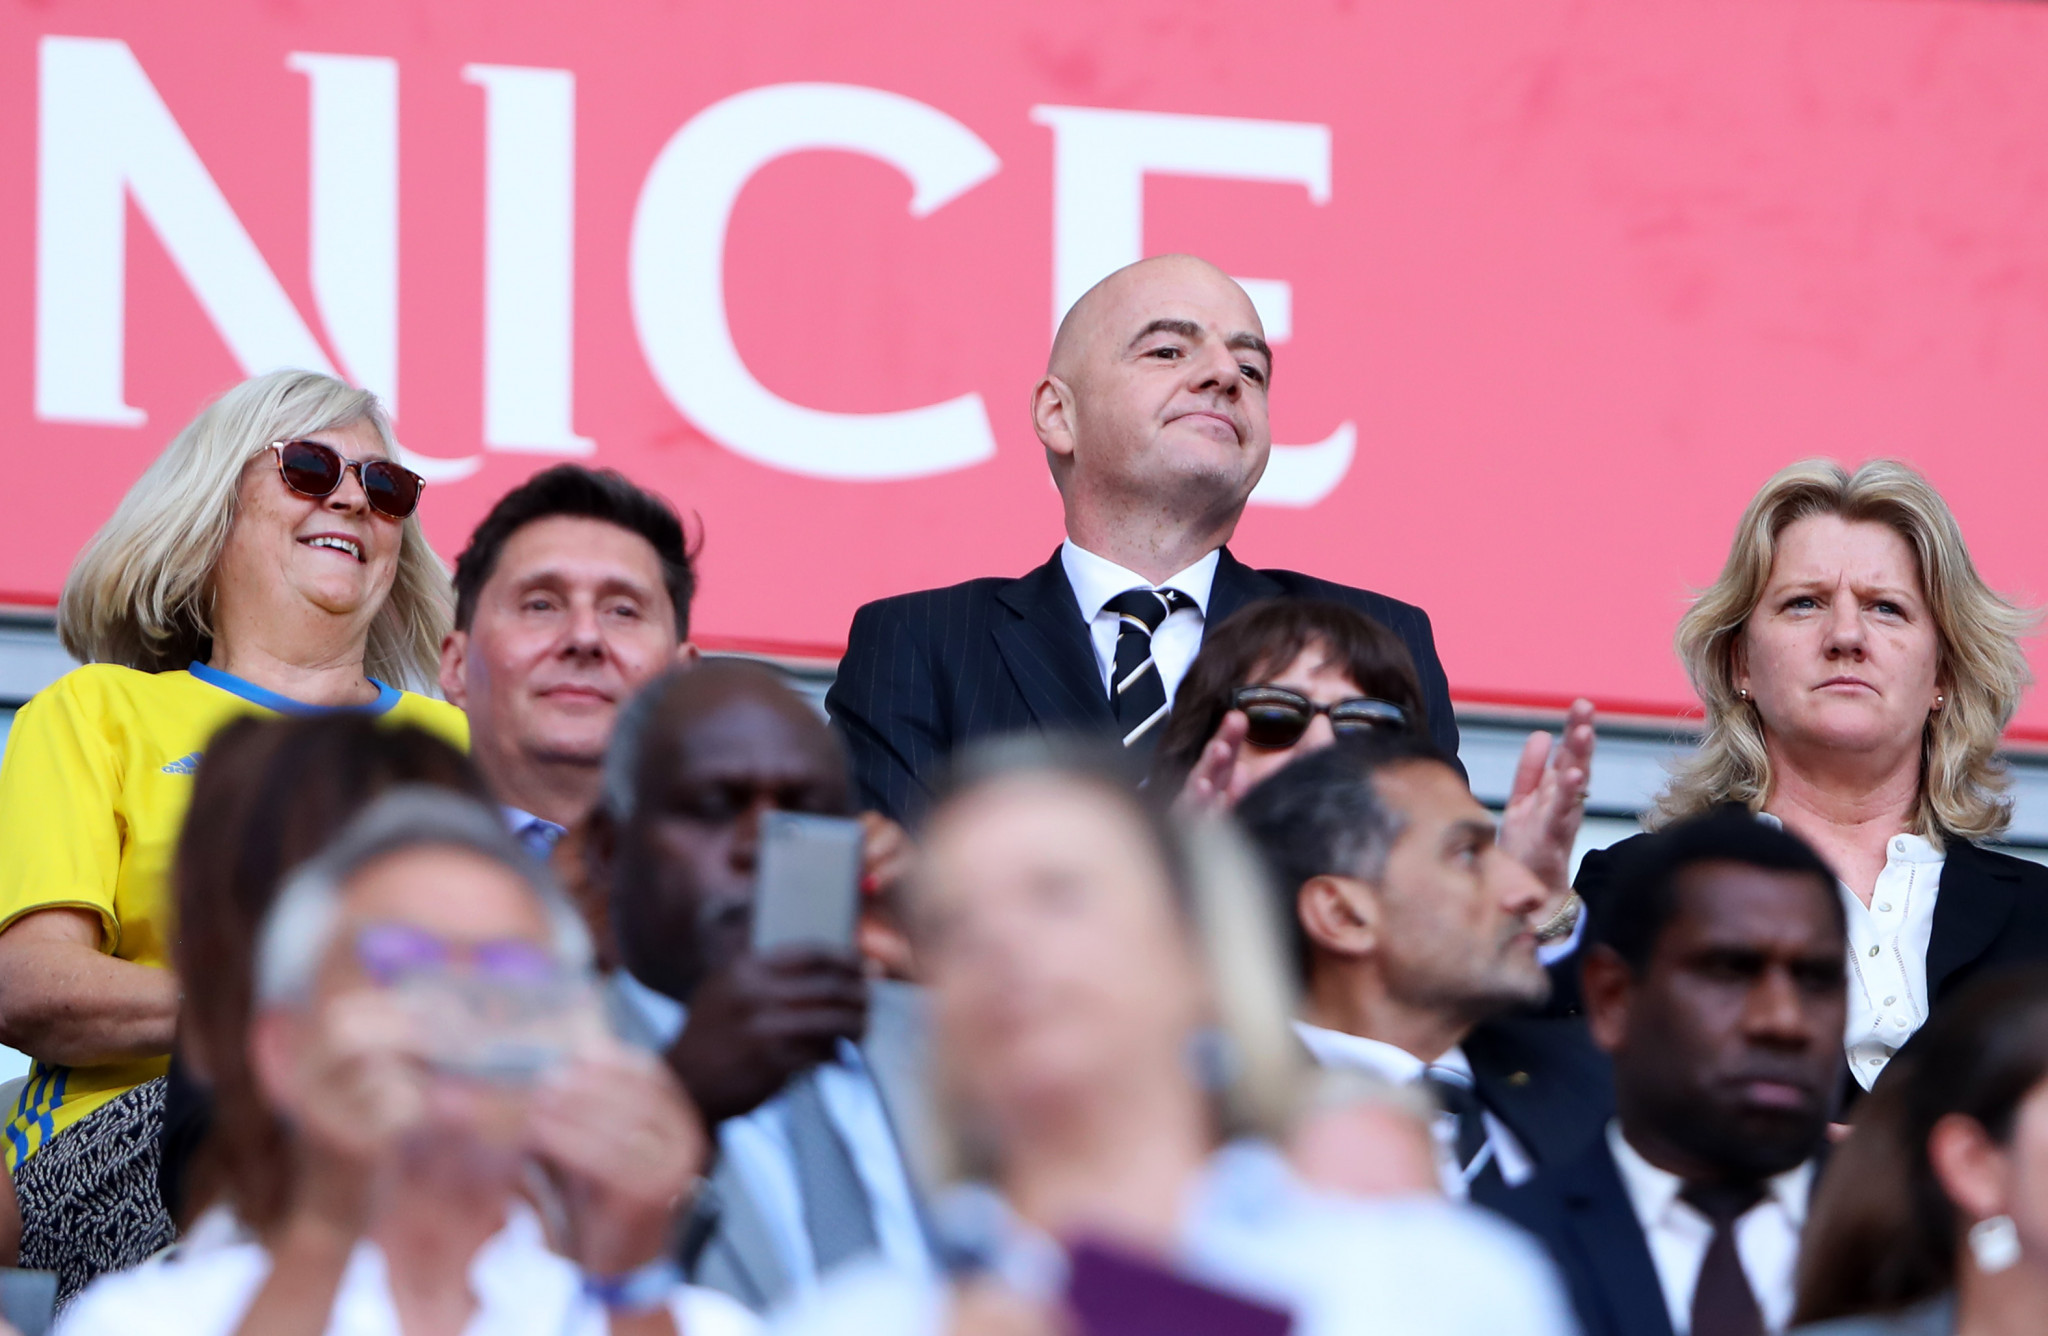 FIFA President Gianni Infantino was among those watching in the stands in Nice ©Getty Images